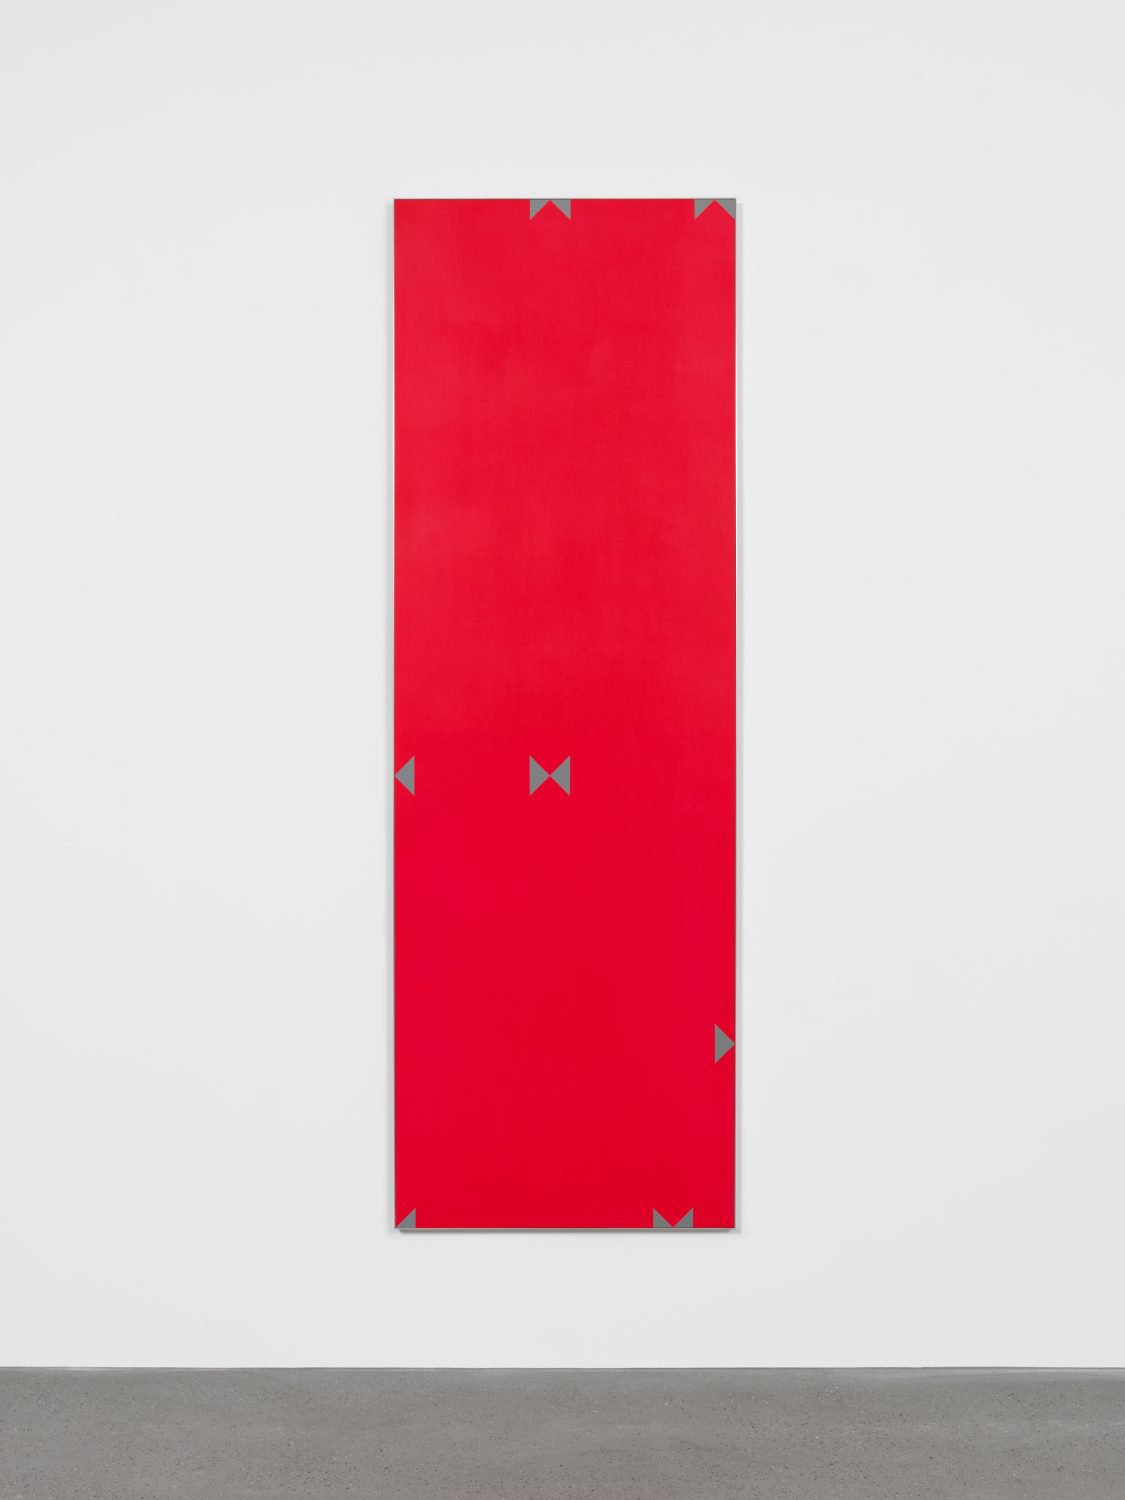 Nick OberthalerUntitled (Eventuality I), 2016Primer, gesso and acrylics on HDF panel/wooden frame180 x 60 cm